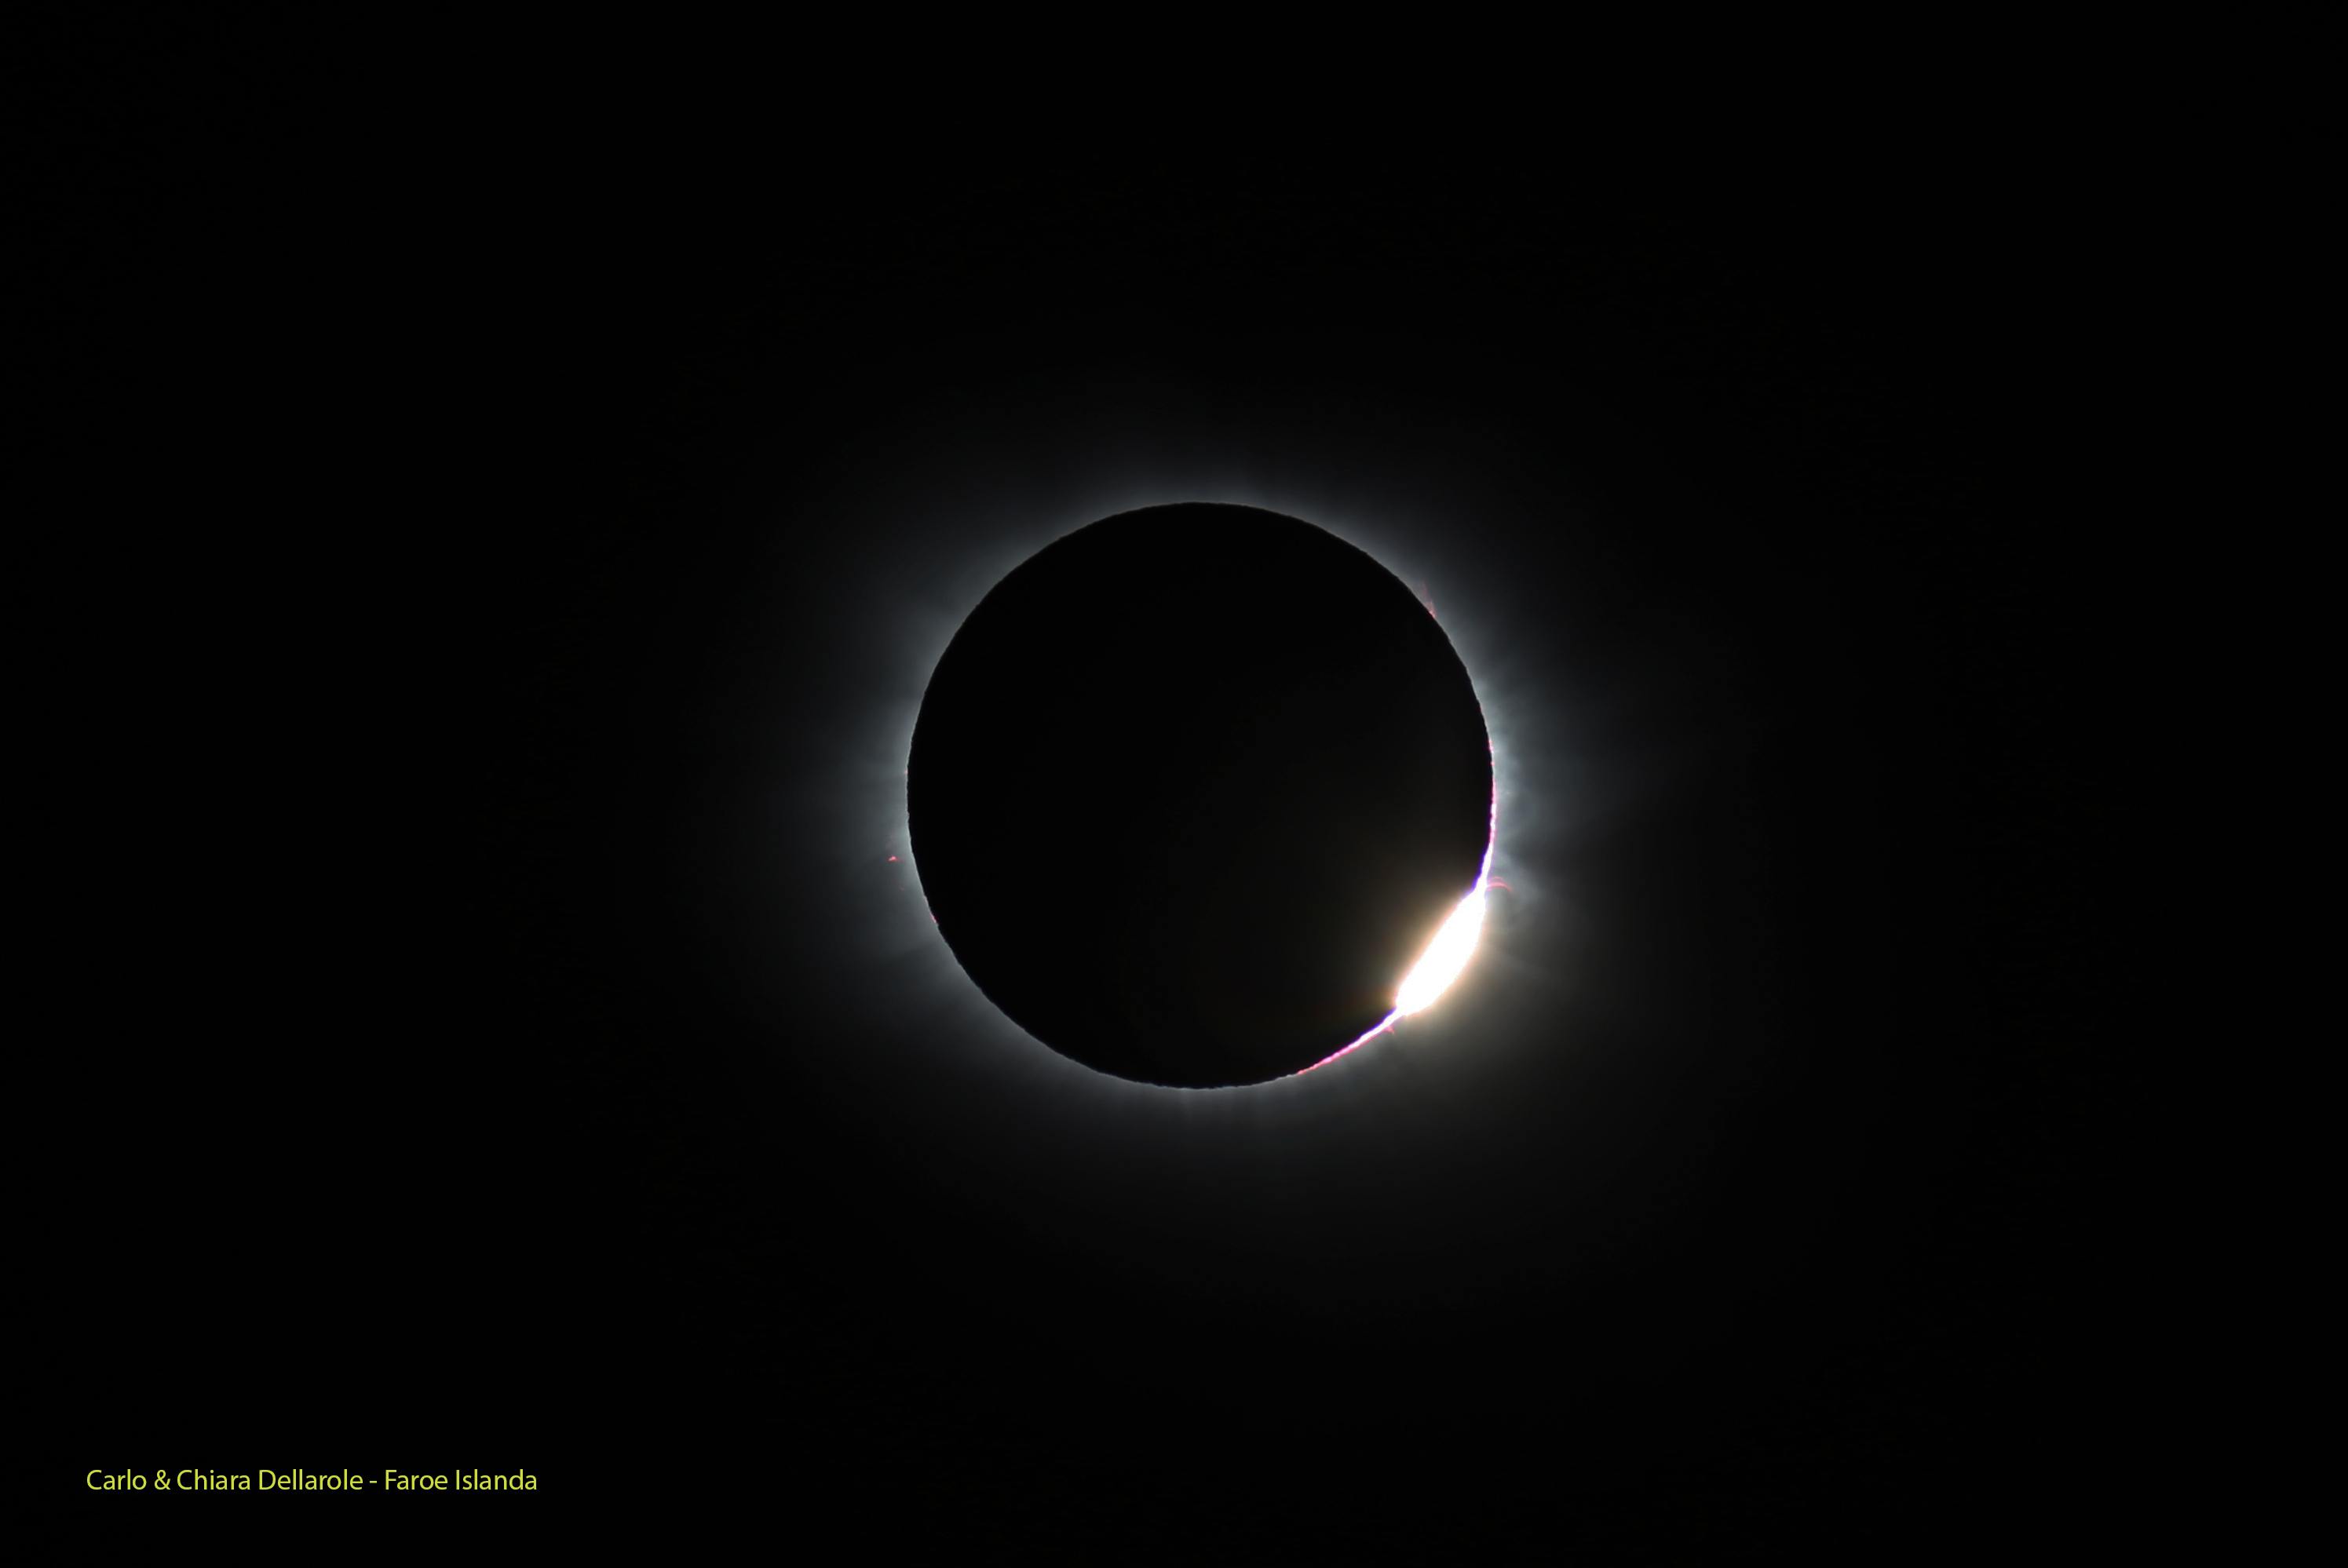 Diamond Ring of the eclipse photographed from Fær Øer Islands: 1.046 KB; click on the image to enlarge